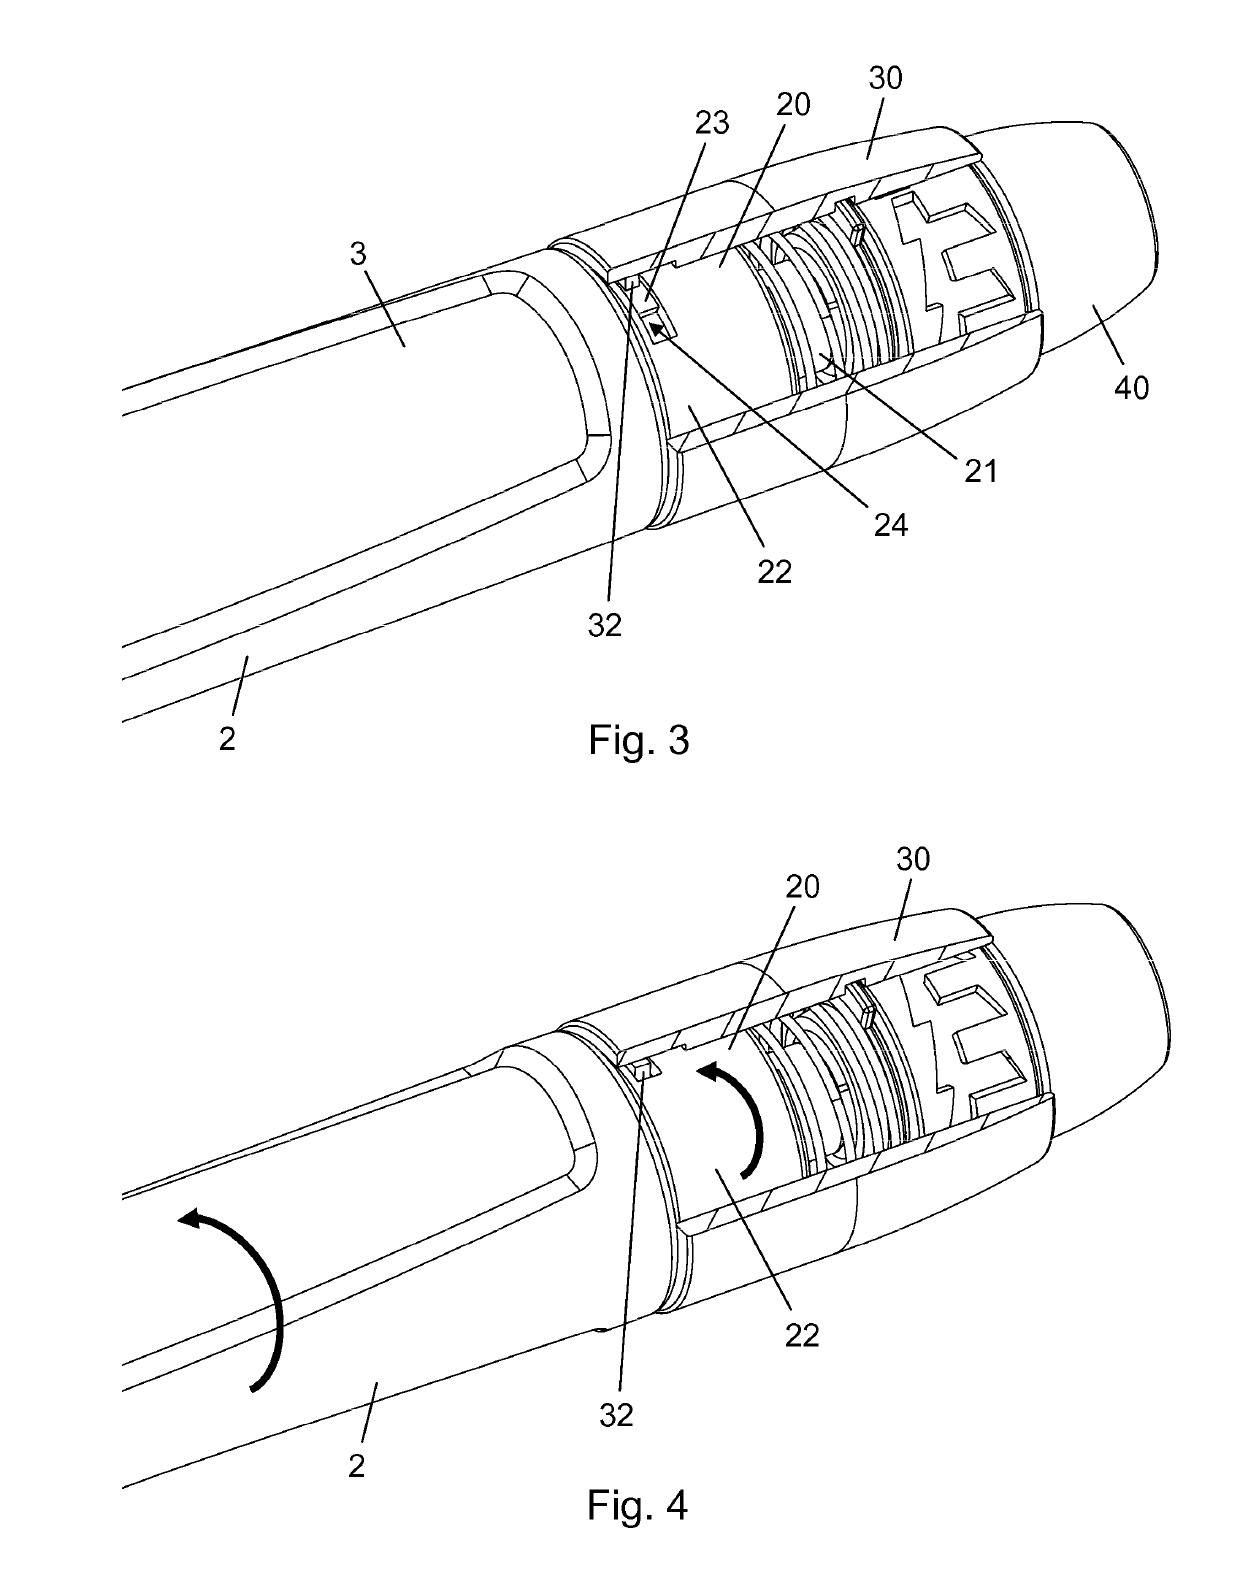 Needle unit for drug delivery device